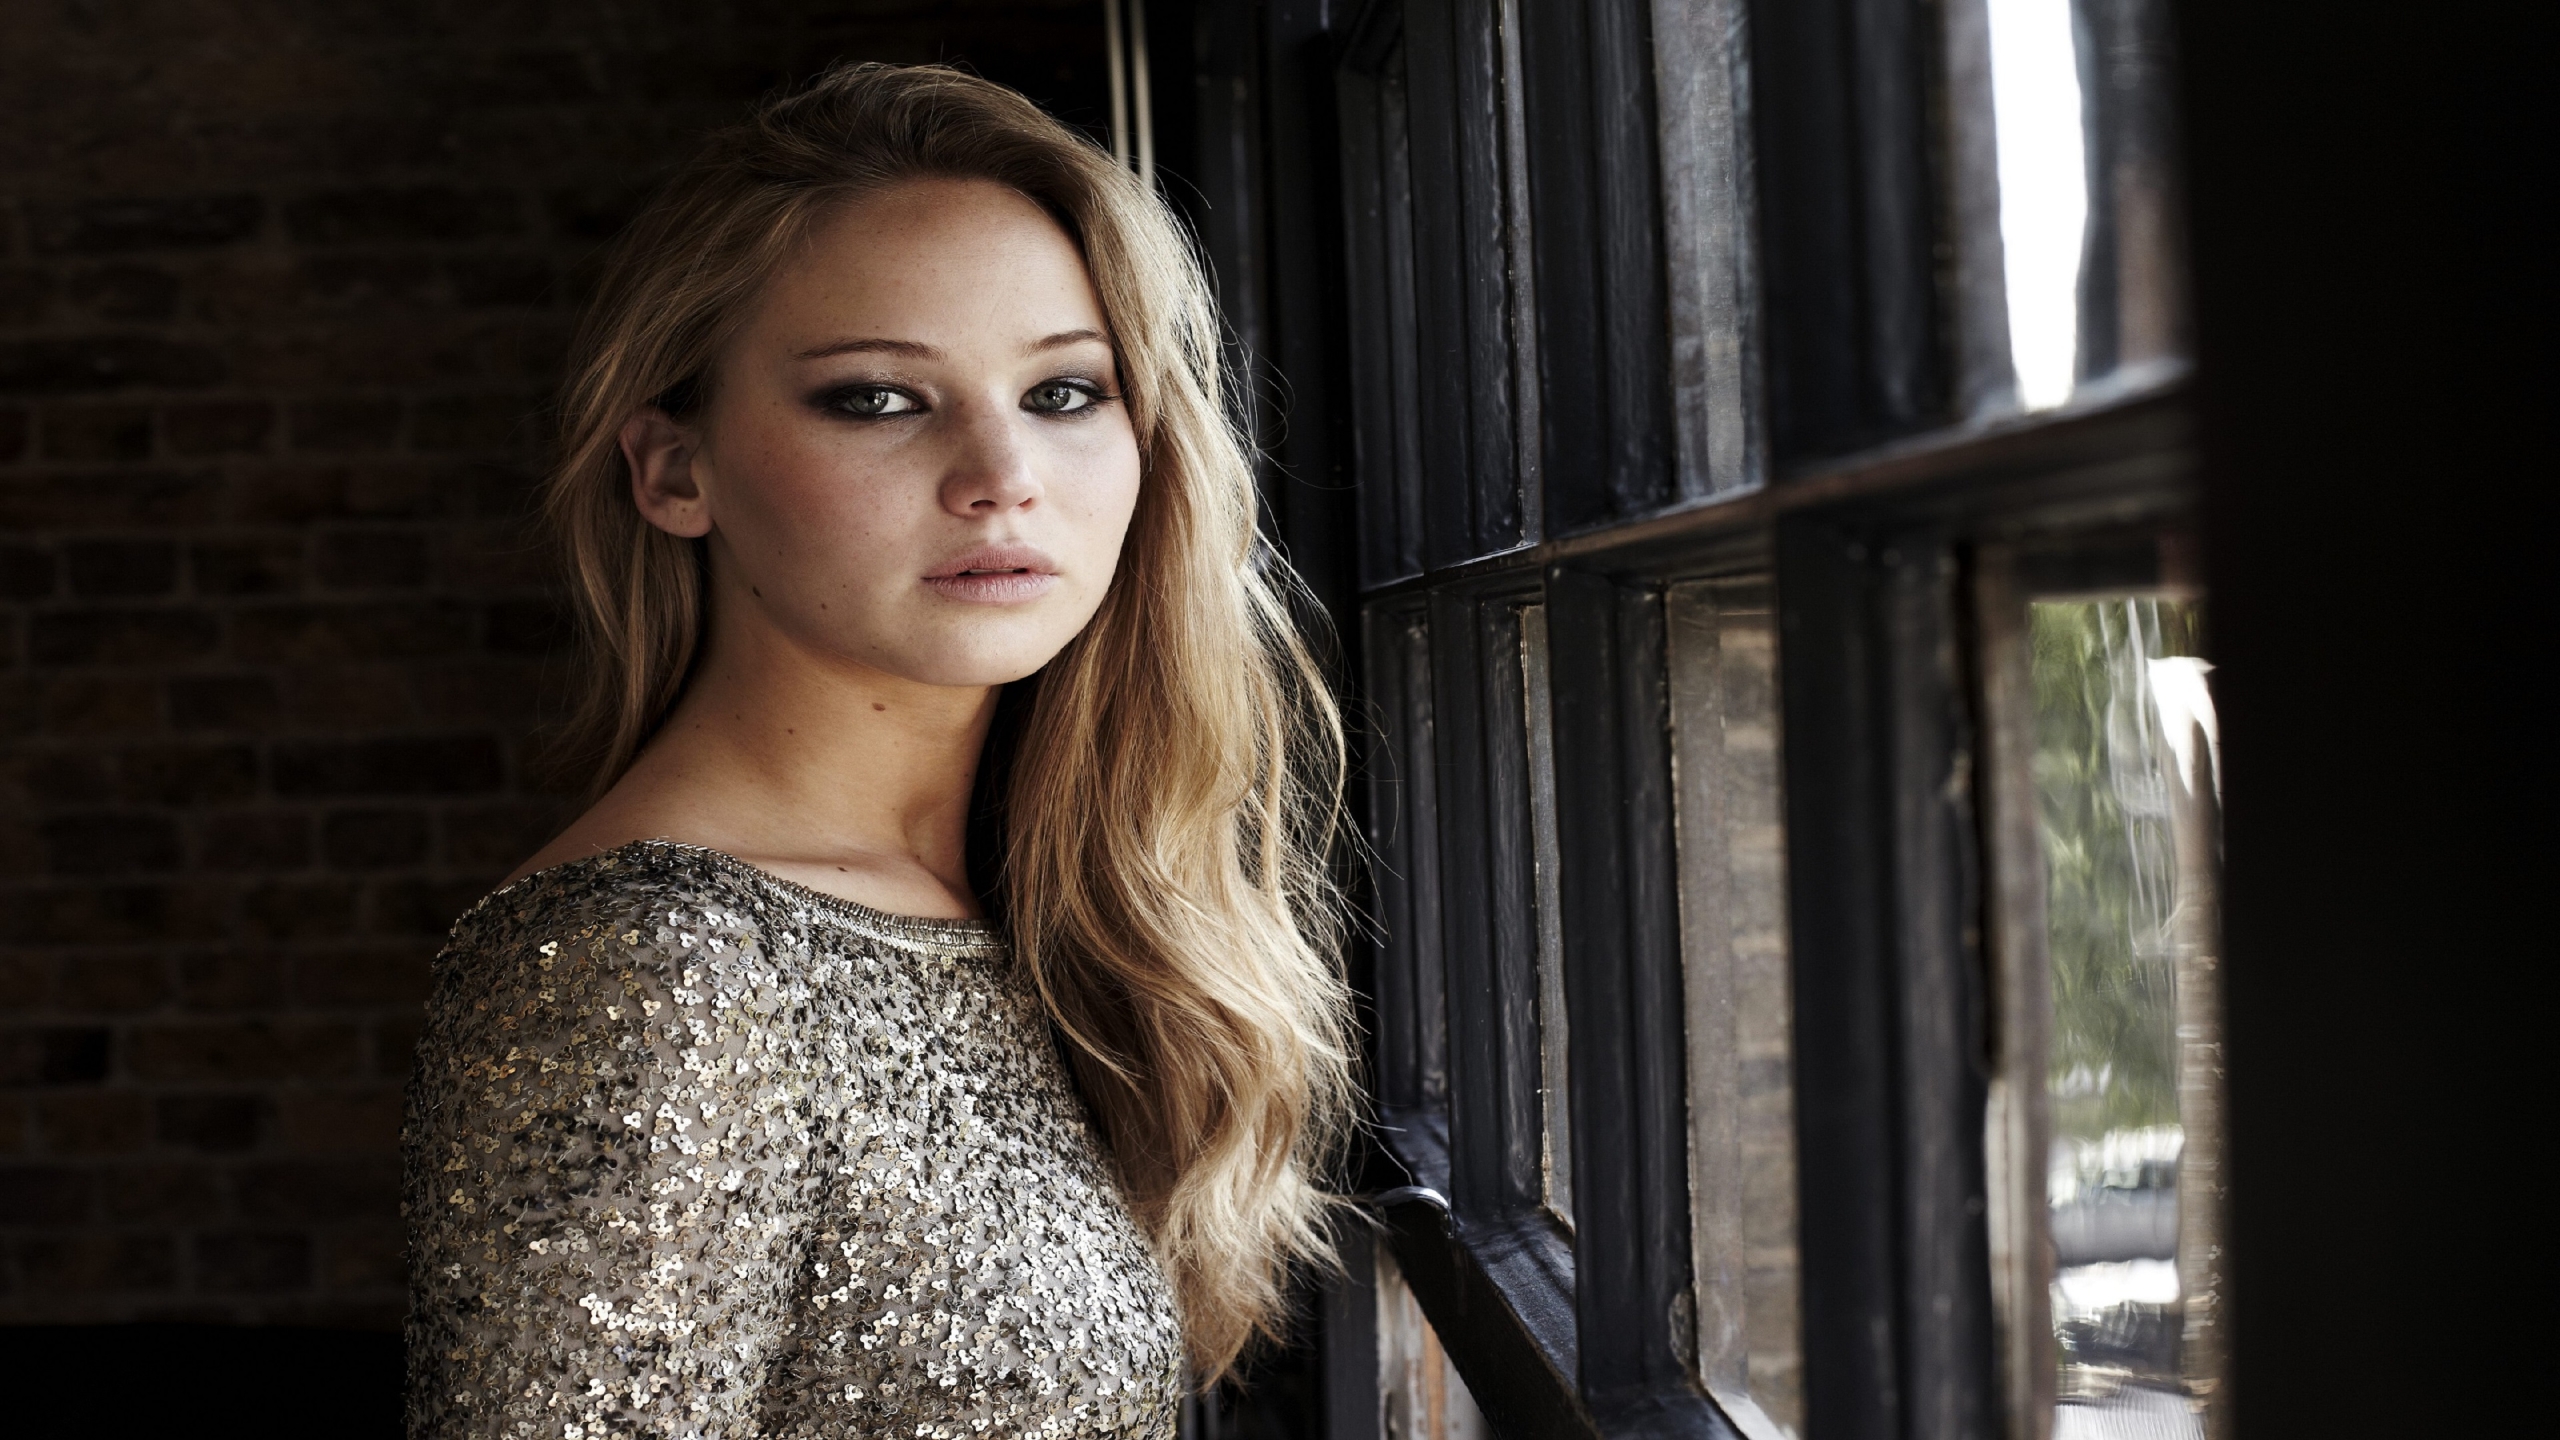 Jennifer Lawrence Cool Look for 2560 x 1440 HDTV resolution